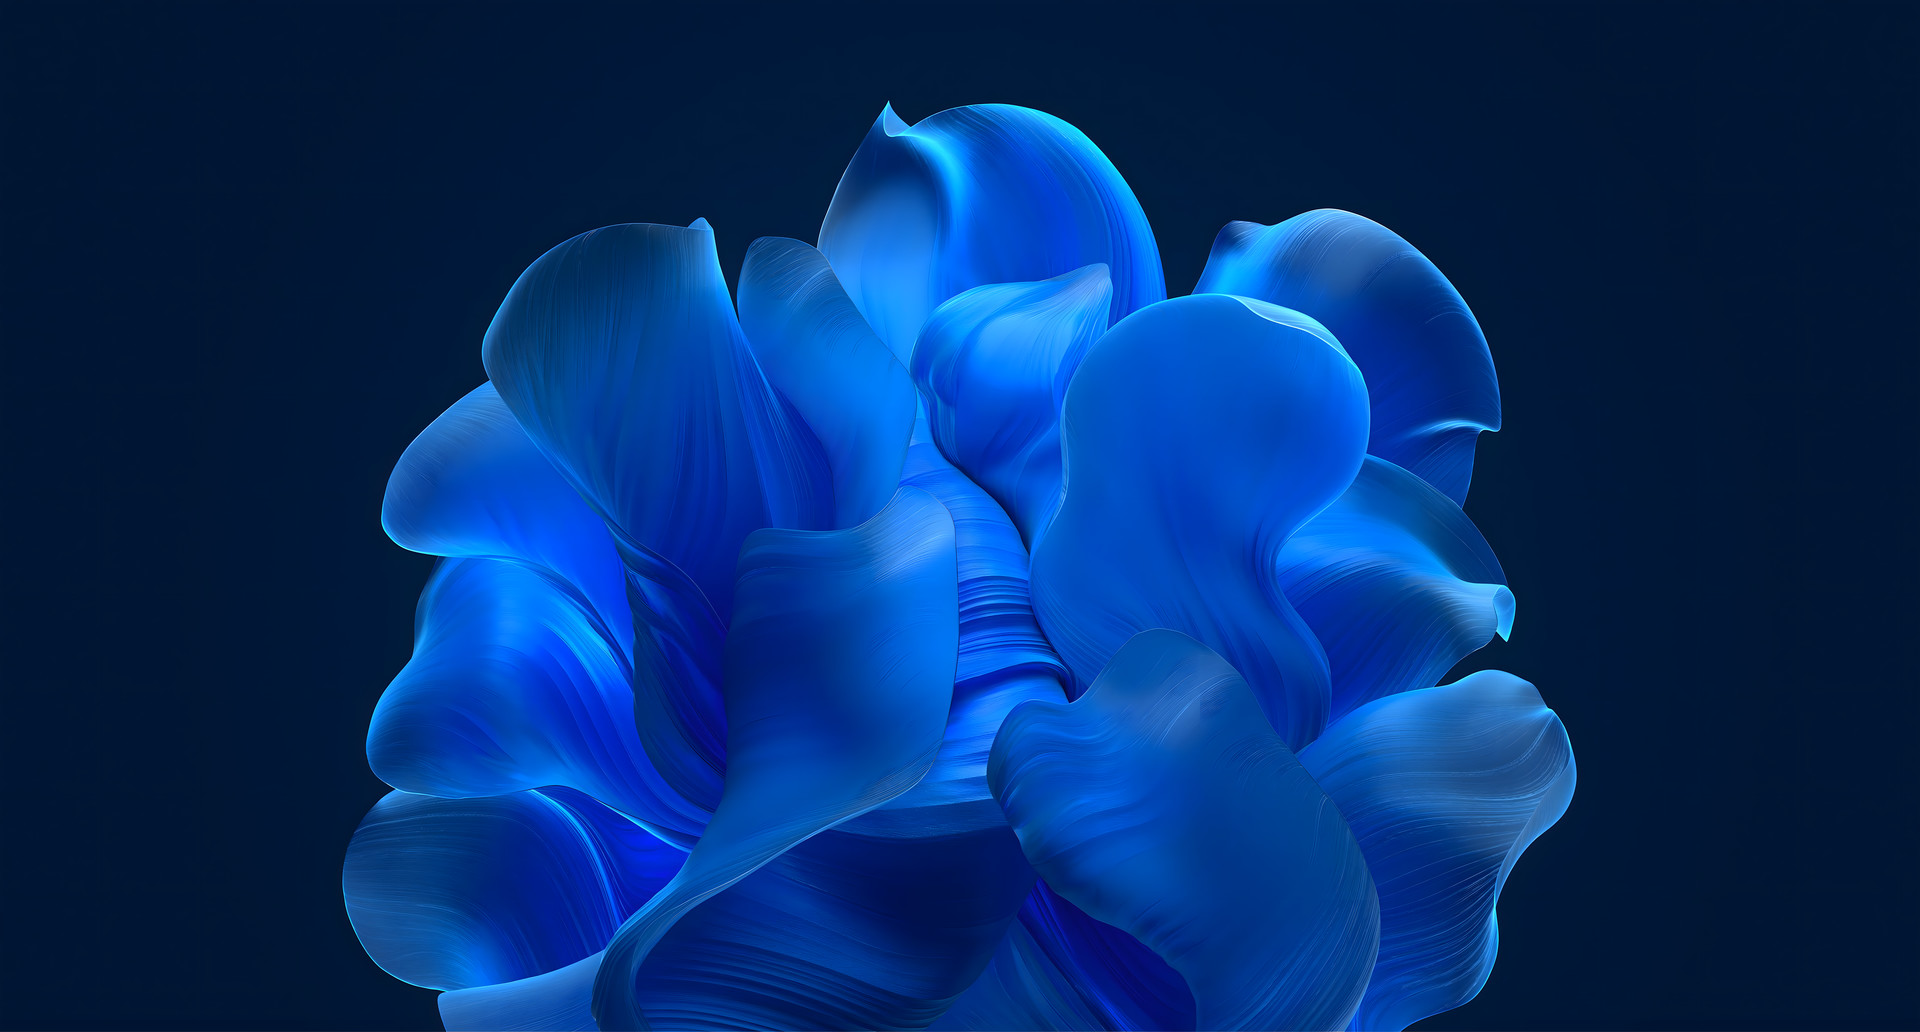 Here is an early version of Windows 11's Bloom wallpaper Microsoft never released